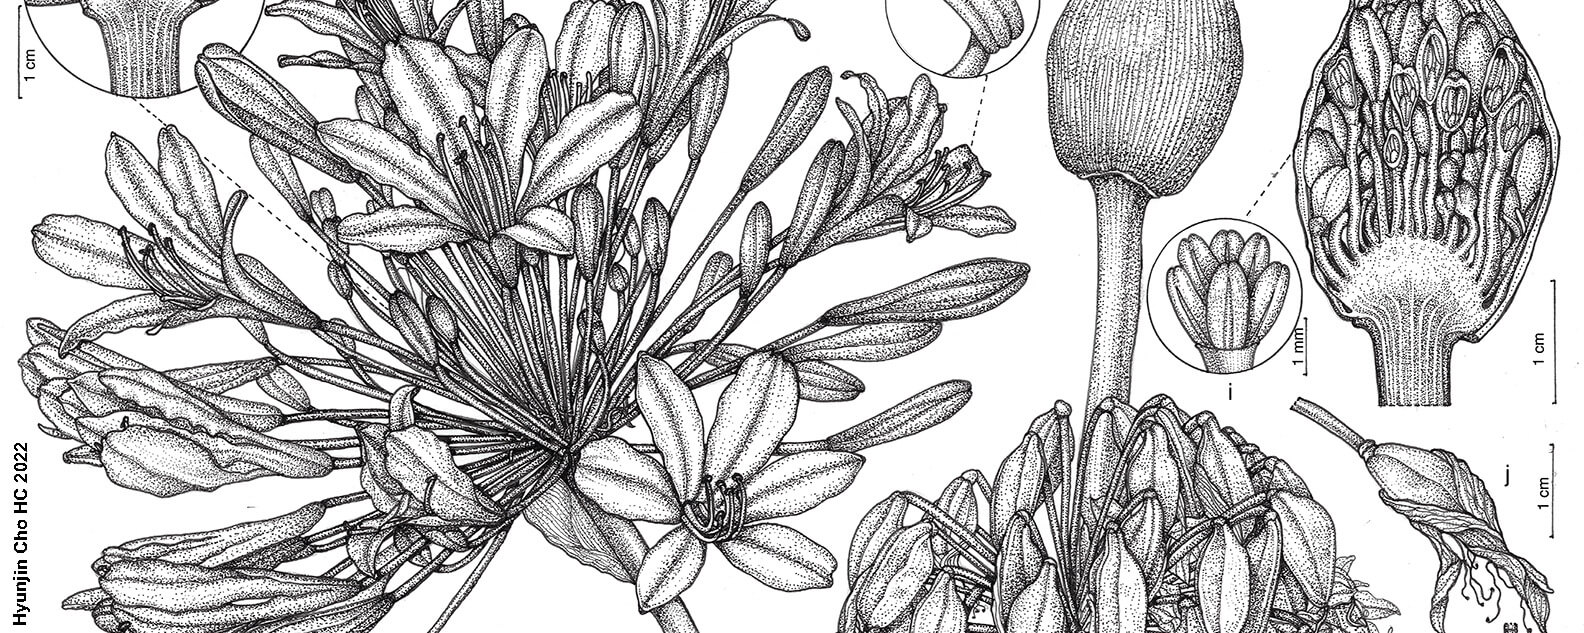 Scientific drawing of Agapanthus, by Hyunjin Cho